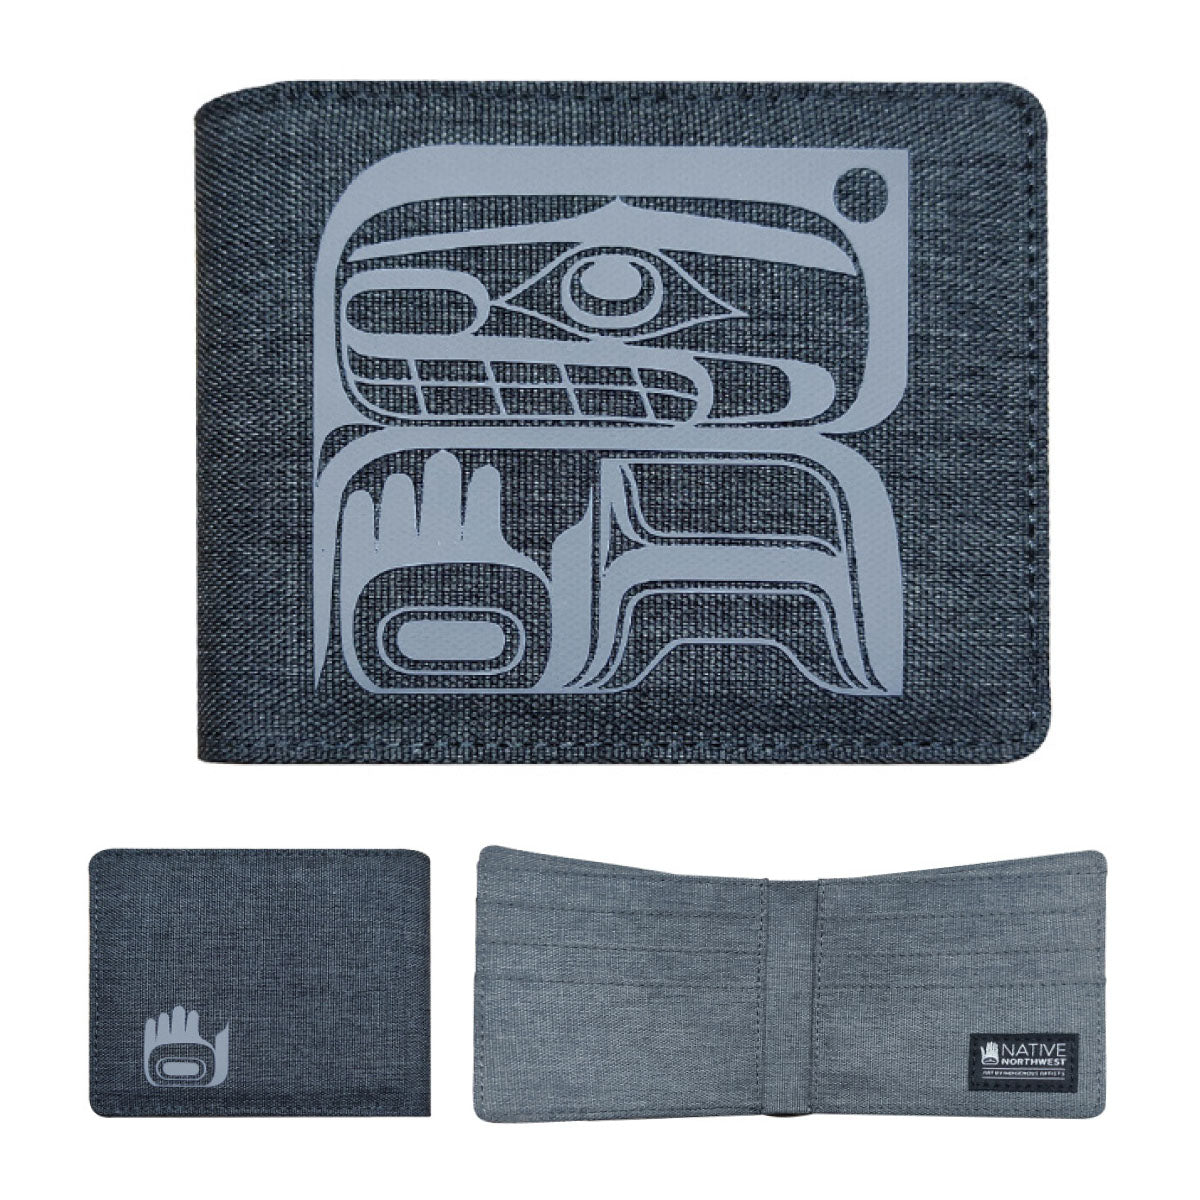 Wallet Tradition Blue - Wallet Tradition Blue -  - House of Himwitsa Native Art Gallery and Gifts